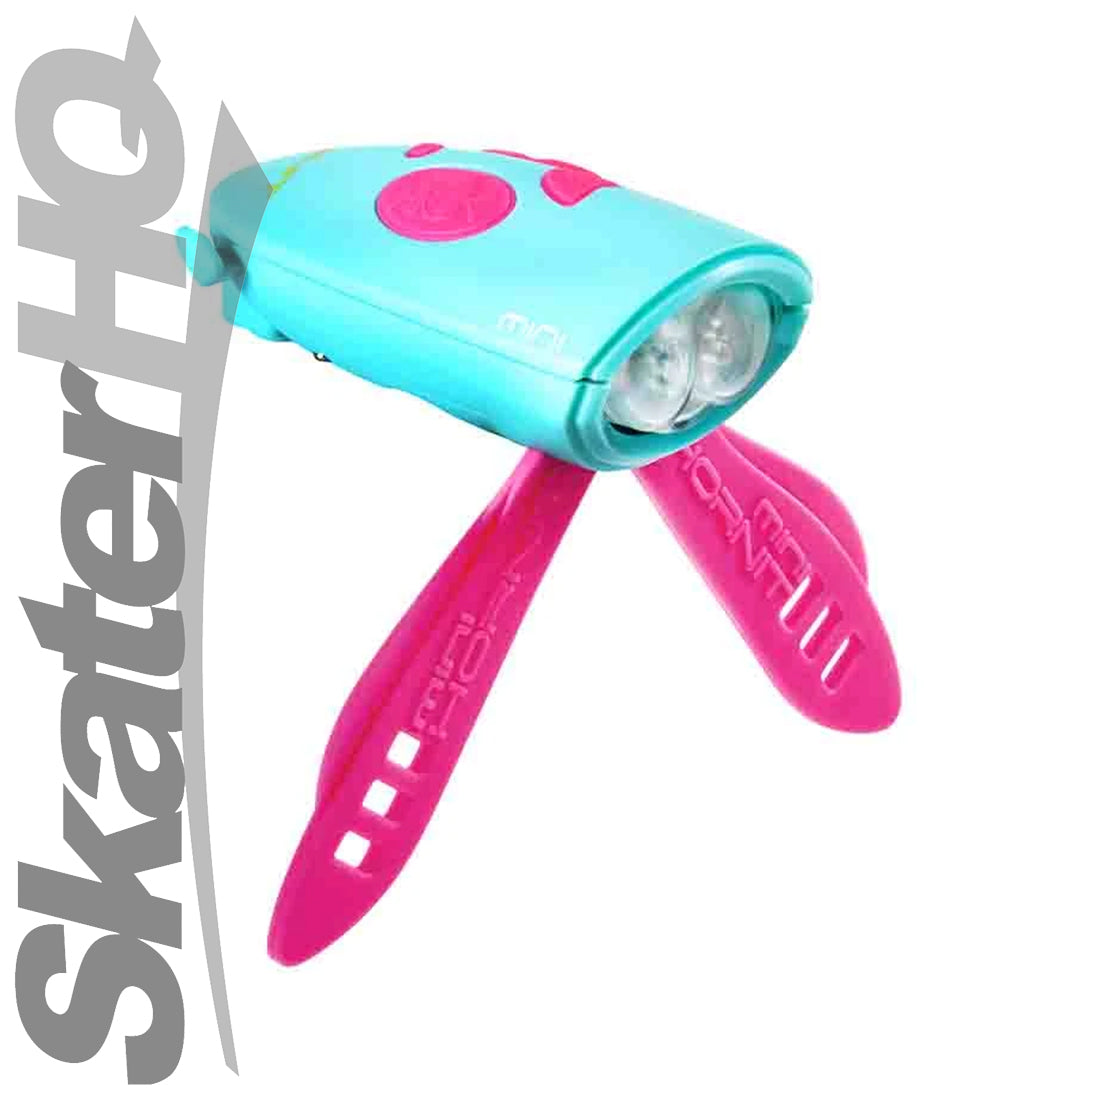 Hornit Mini Noise Maker &amp; Light - Pink/Turquoise Scooter Accessories